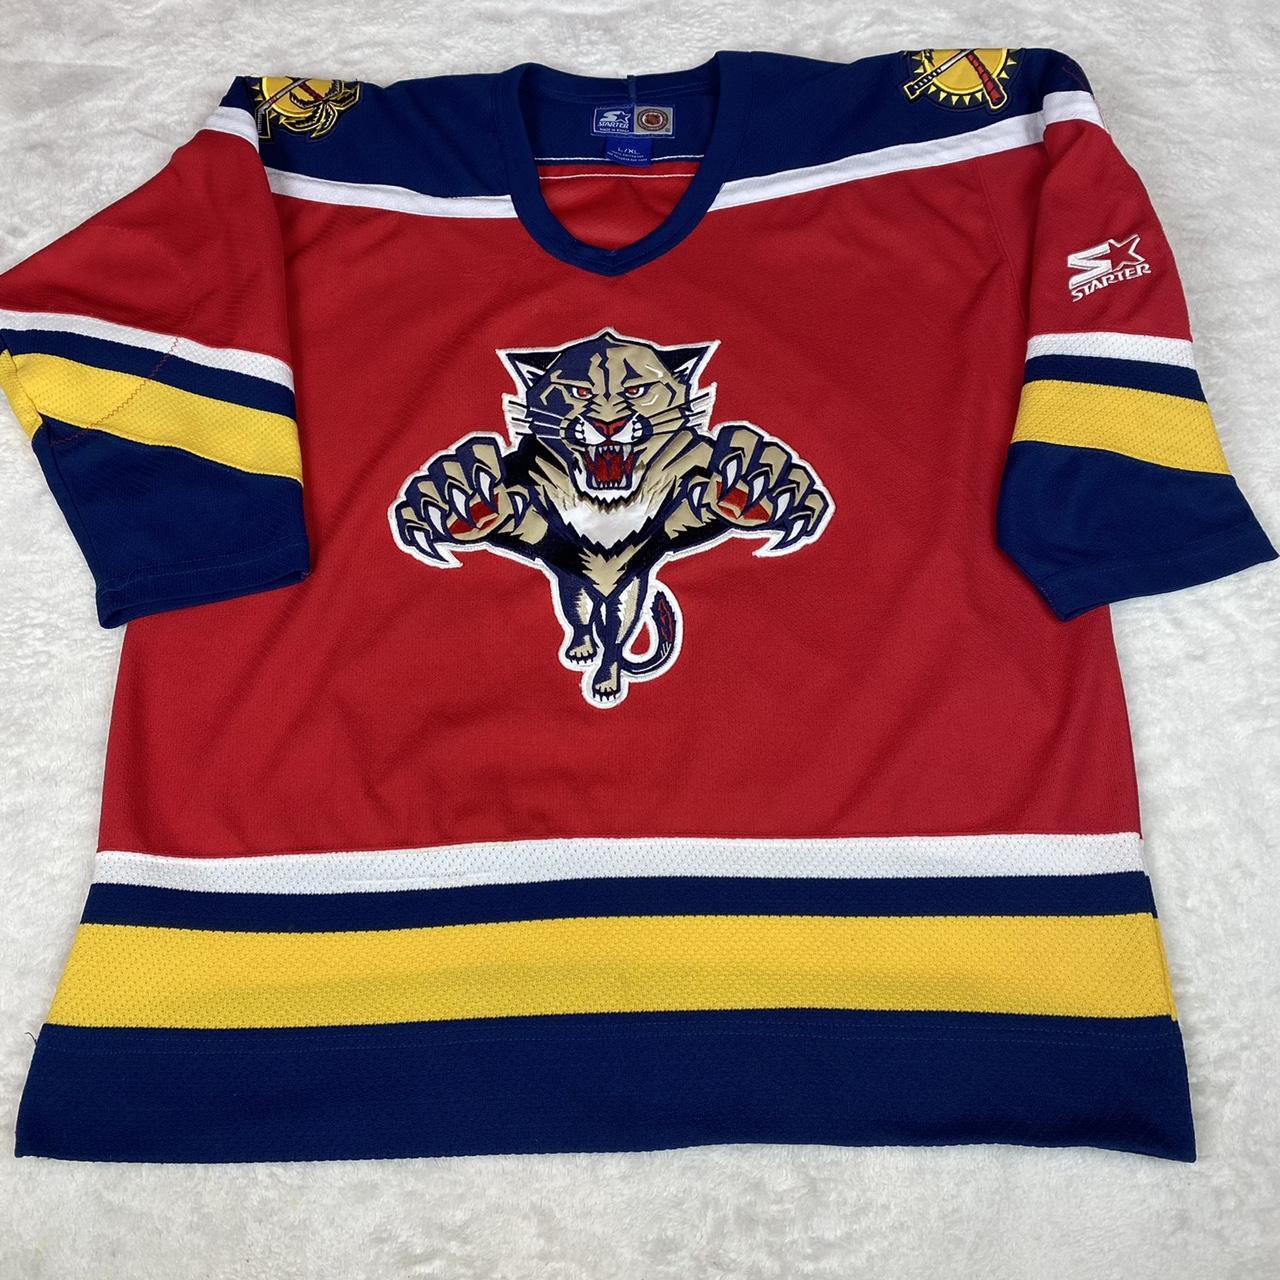 NEW Florida Panthers youth L/XL jersey